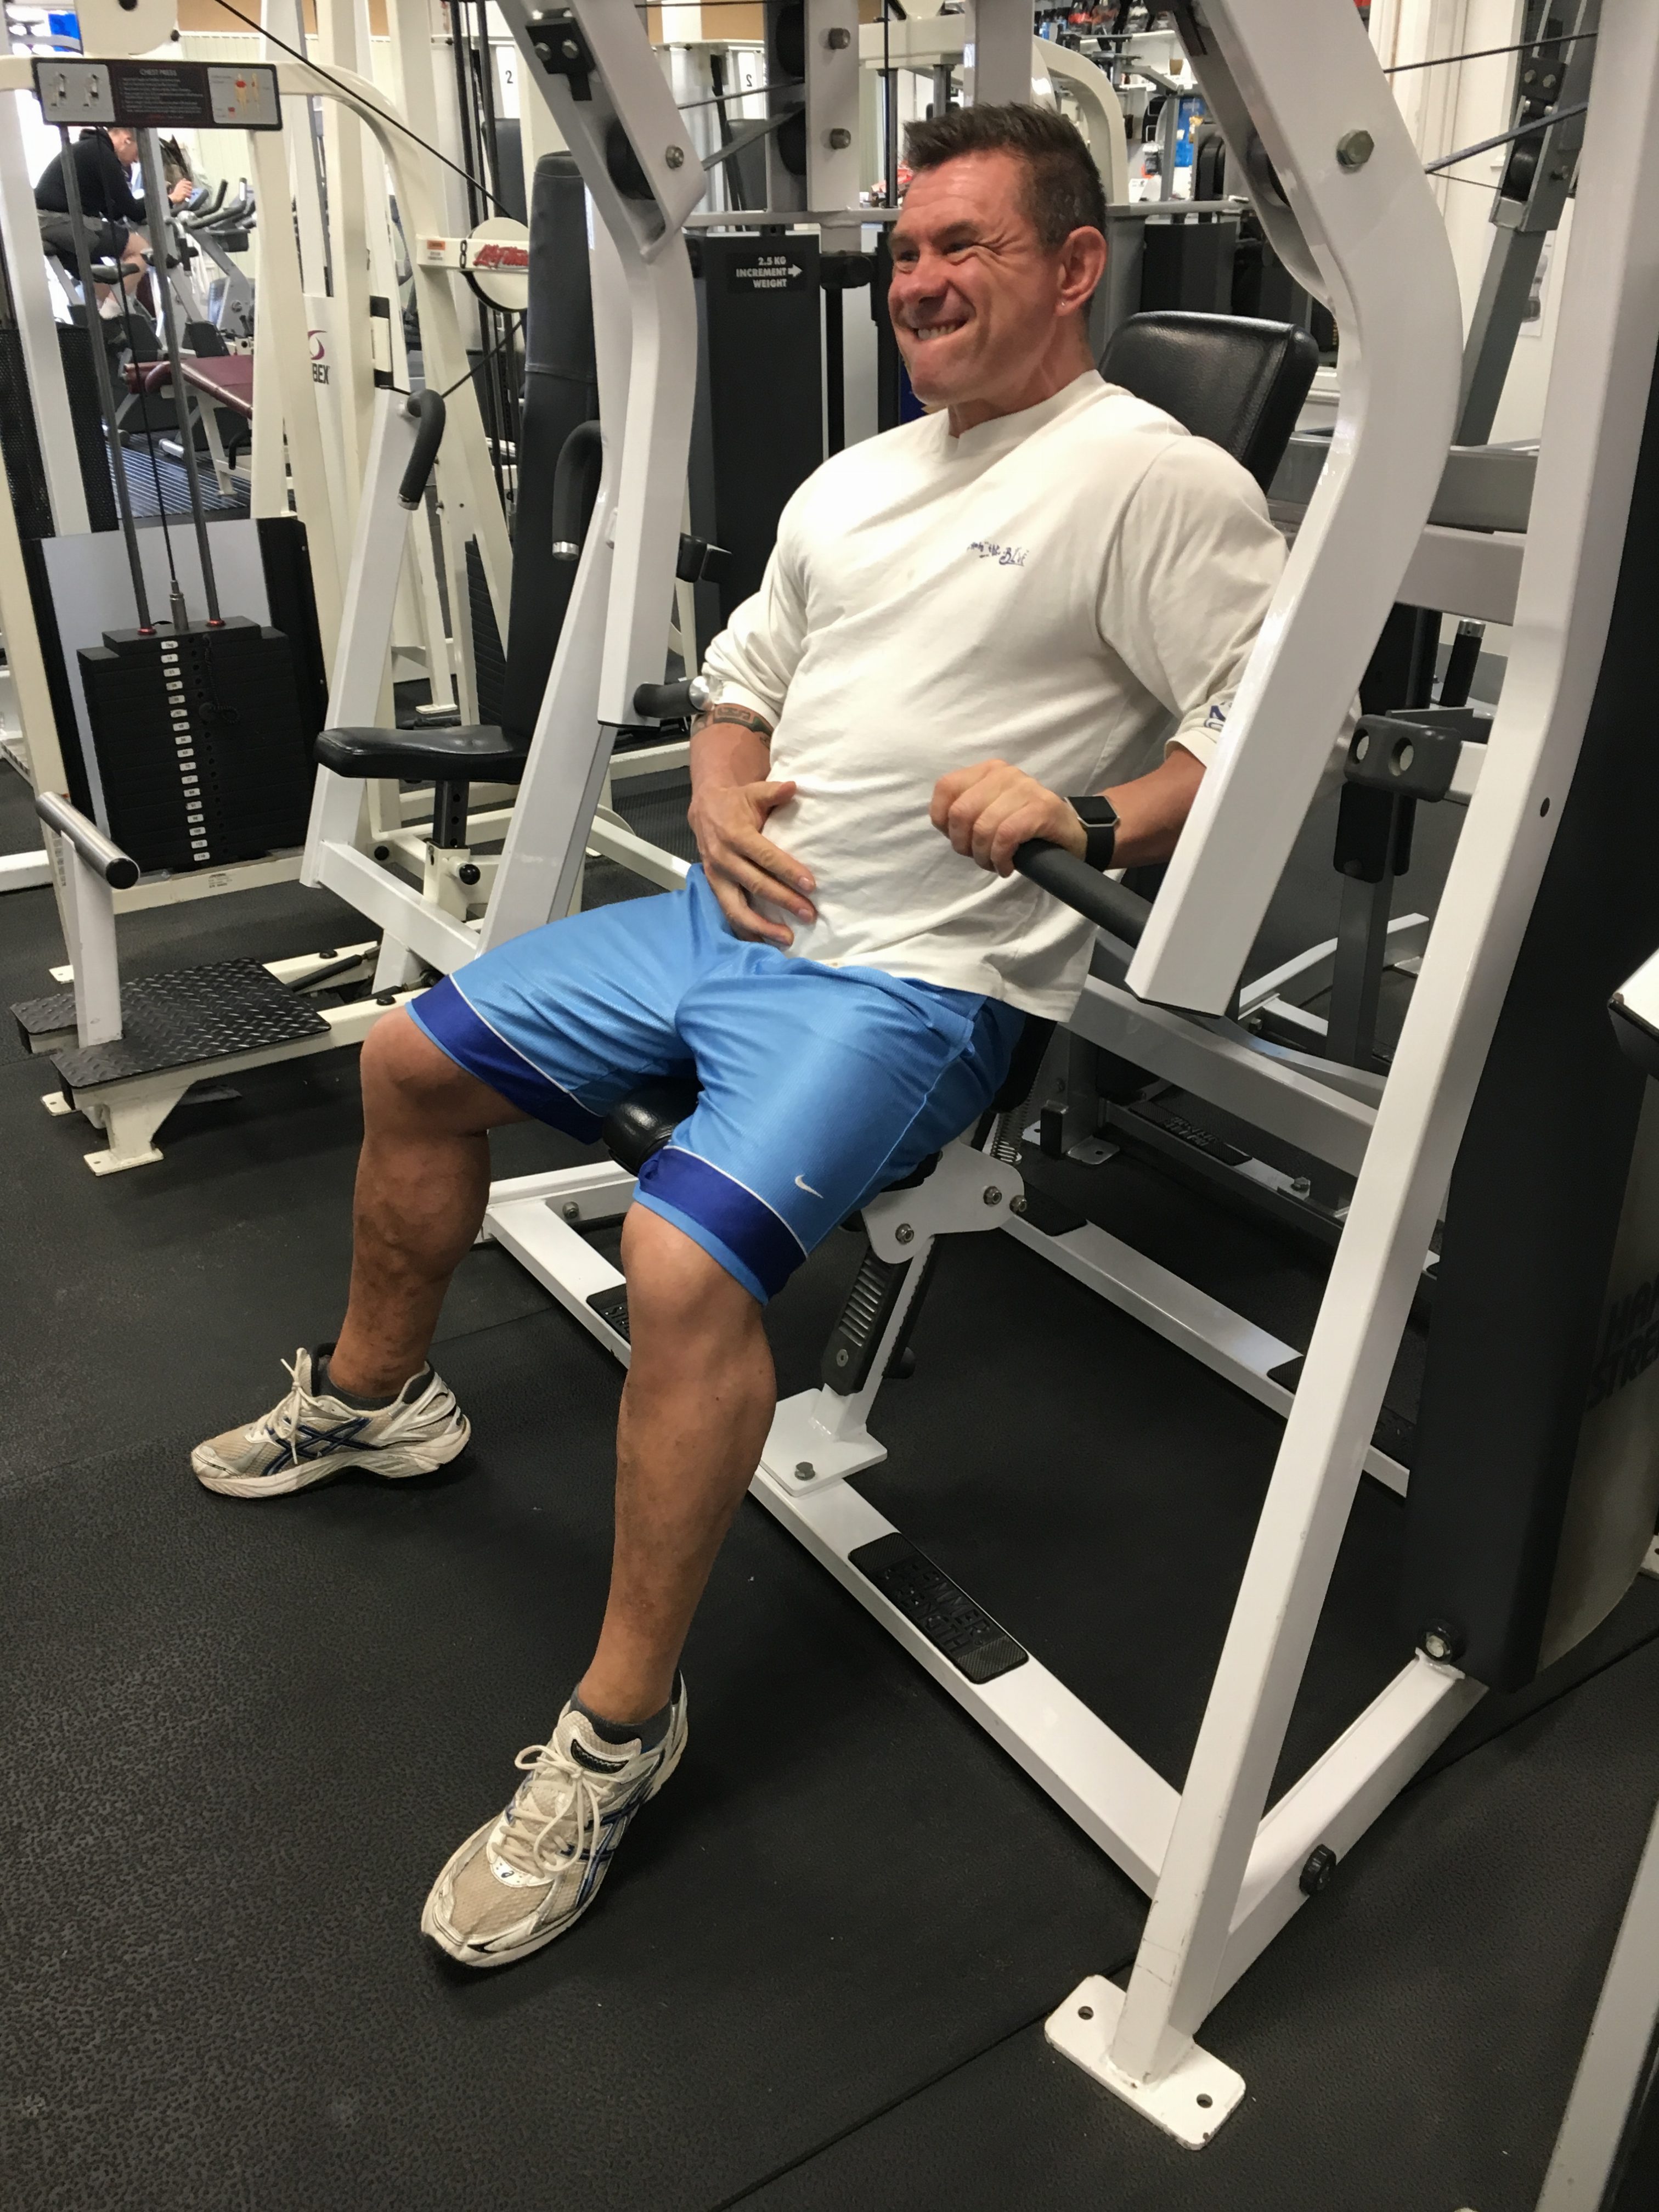 Training whilst injured – Why Not!